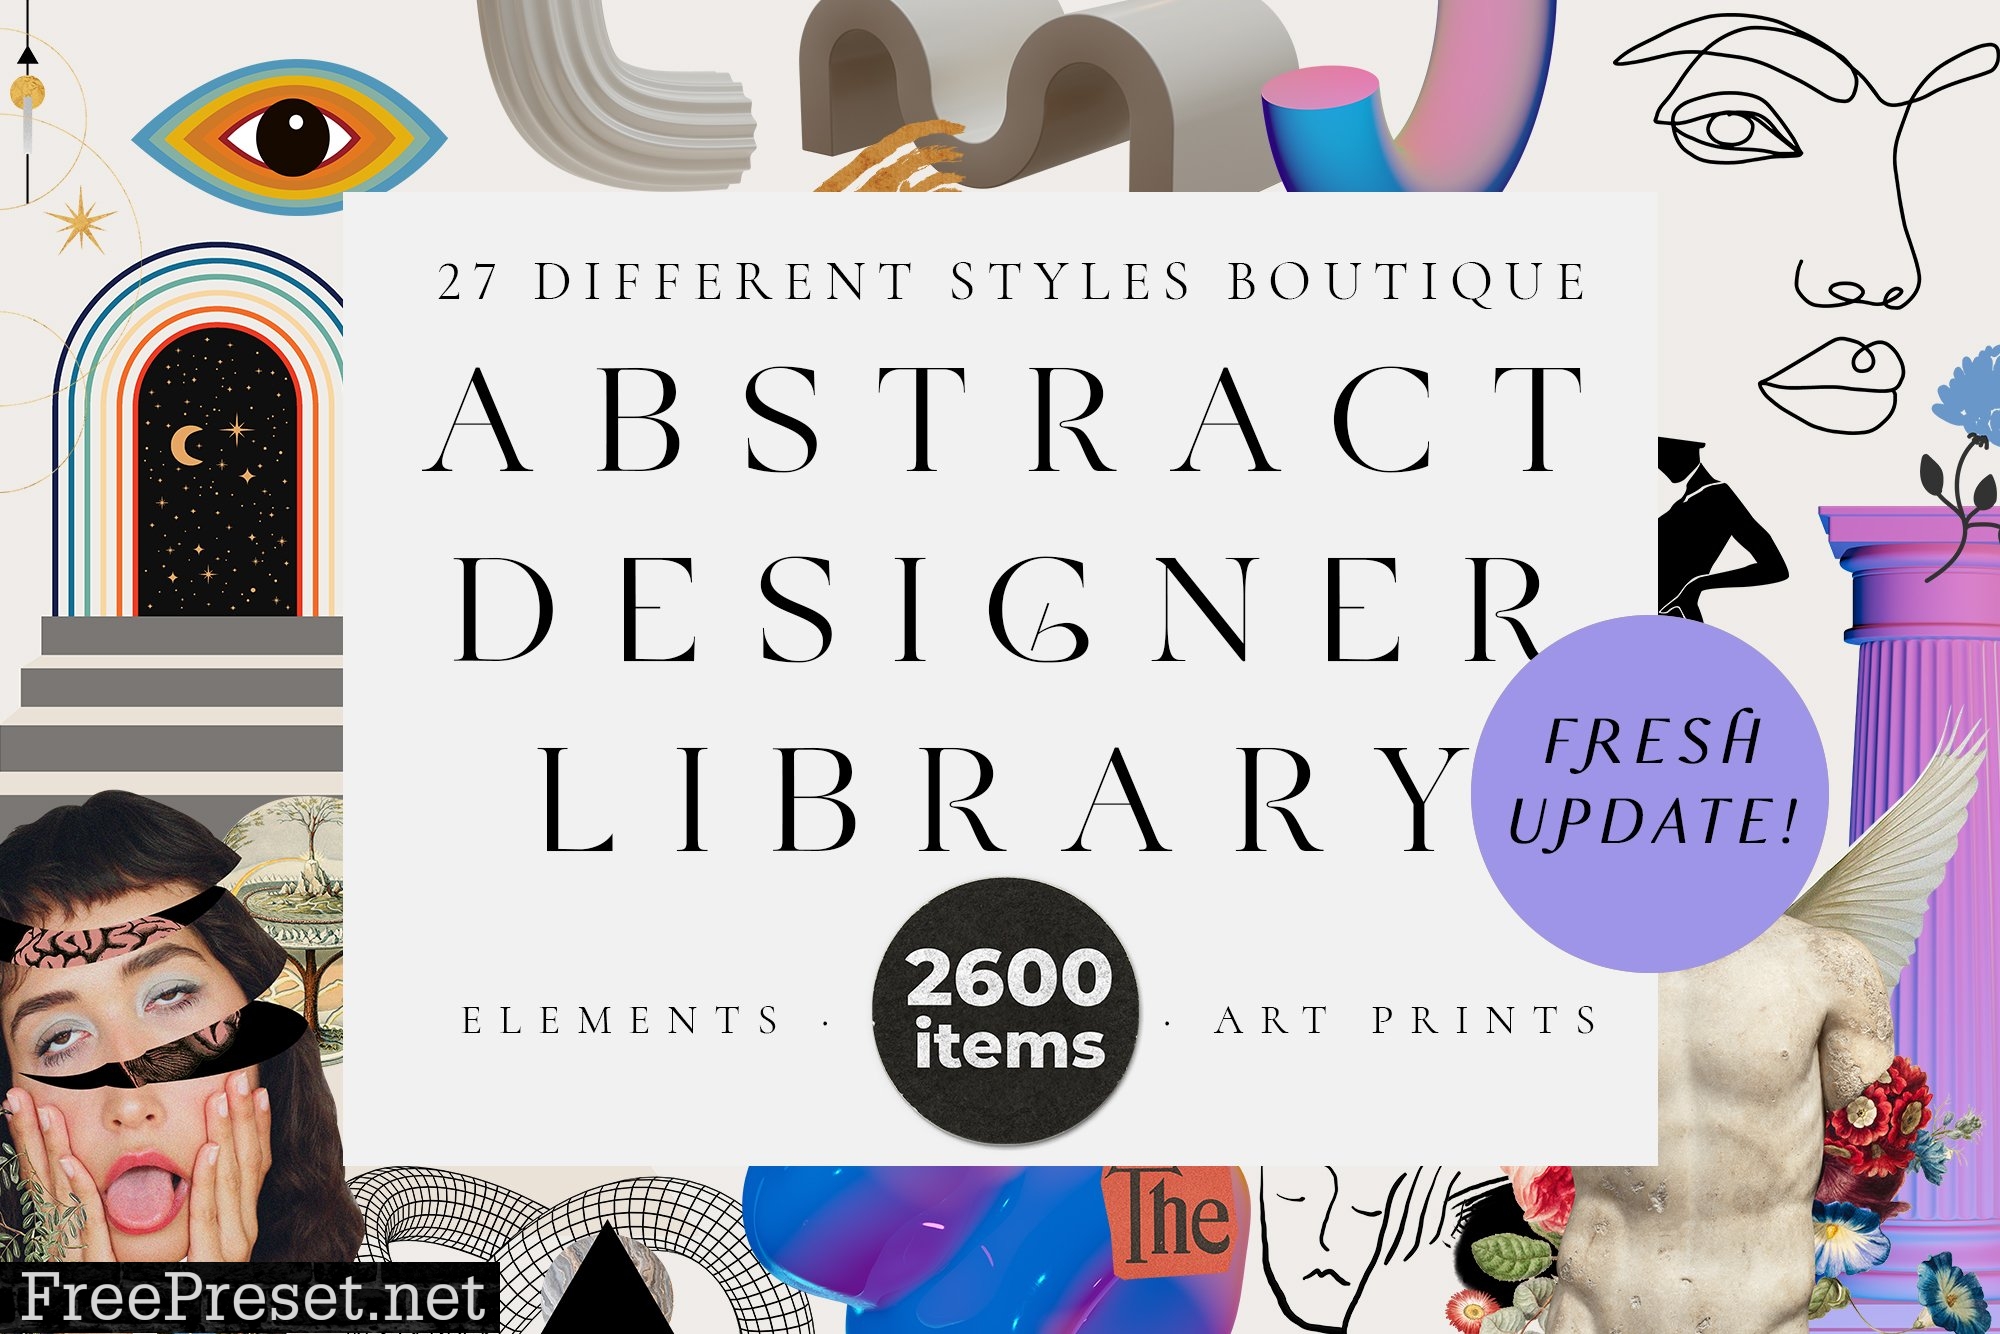 ABSTRACT DESIGNER LIBRARY - 5847342